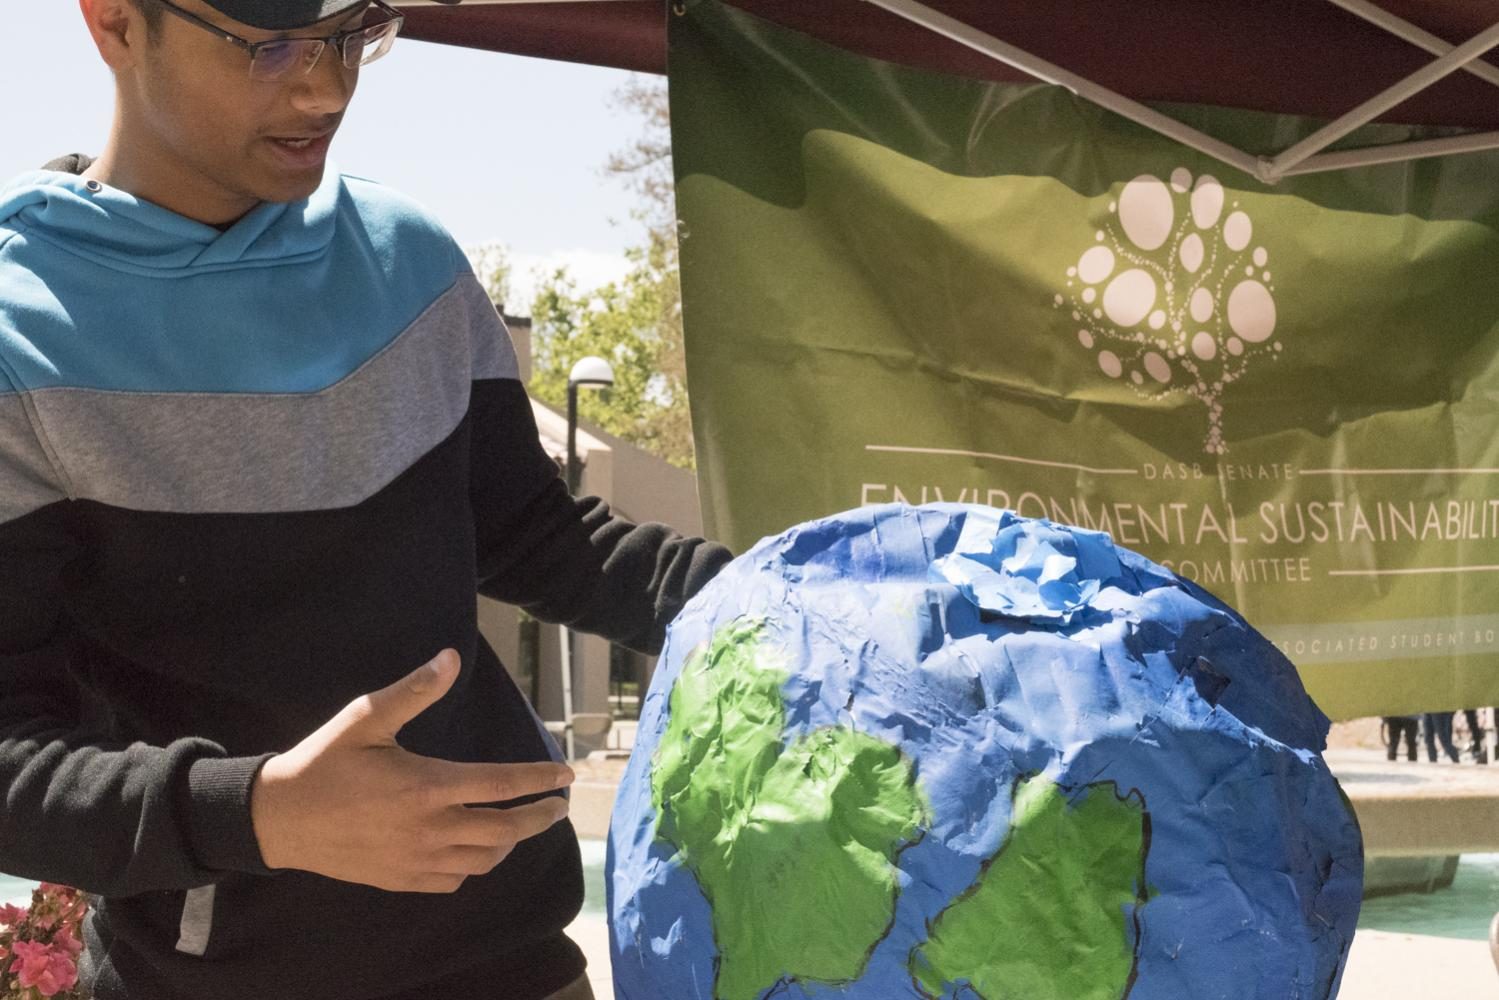 Adita Vishwakarma, 18, engineering major, explains the importance of environmental sustainability on a paper-mache globe made out of old La Voz issues